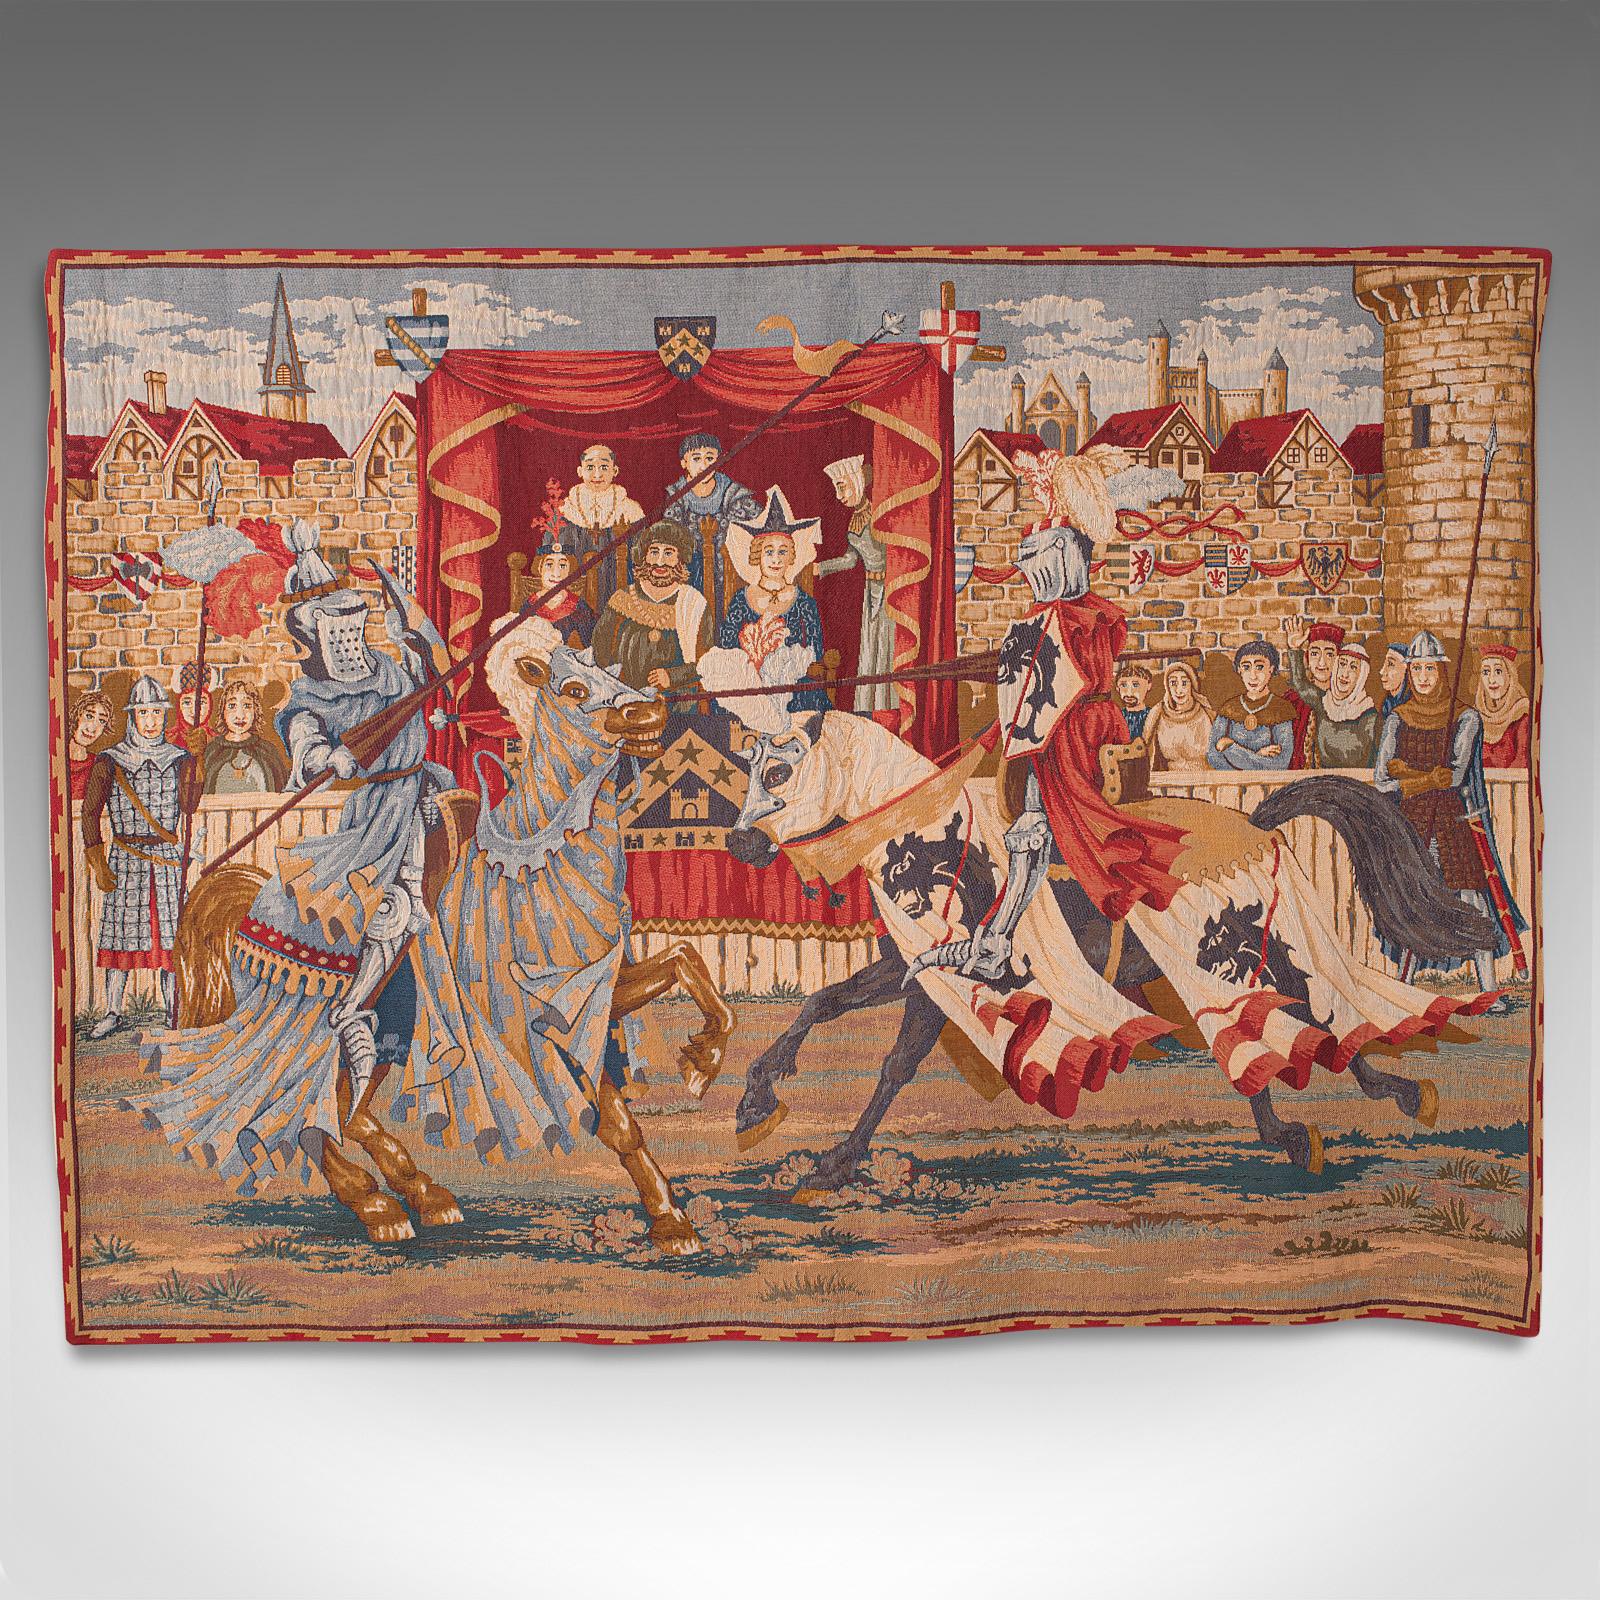 This is a large vintage wall tapestry. A French, quality needlepoint display panel depicting a Medieval tournament scene, dating to the late 20th century.

Colourful tapestry of impressive proportion and fine quality
Displays a desirable aged